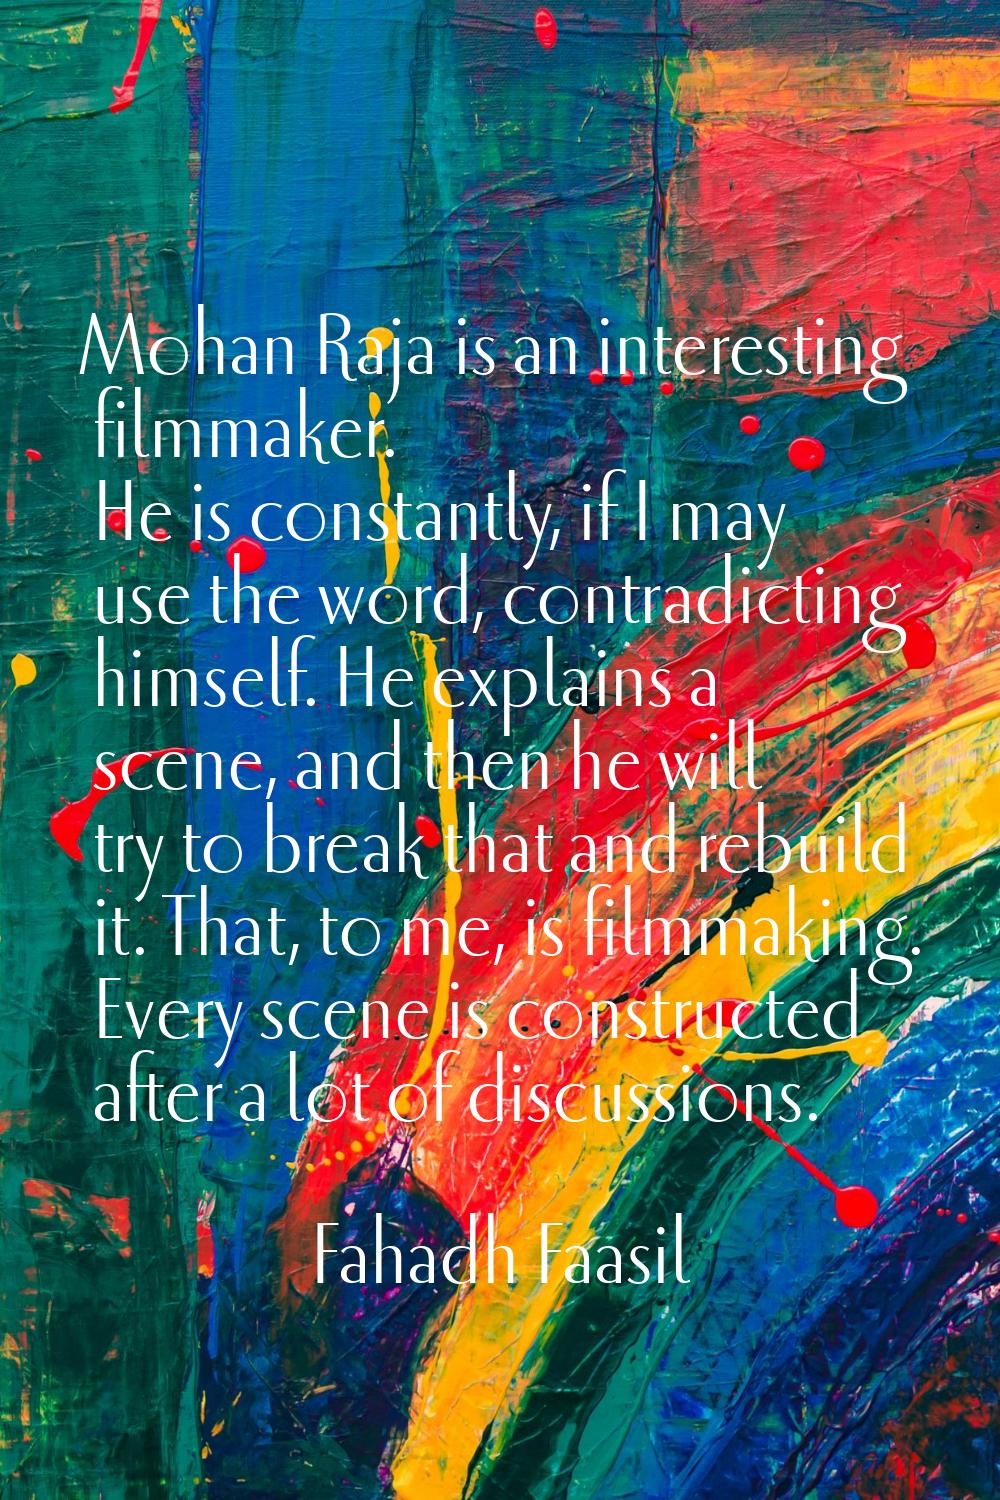 Mohan Raja is an interesting filmmaker. He is constantly, if I may use the word, contradicting hims